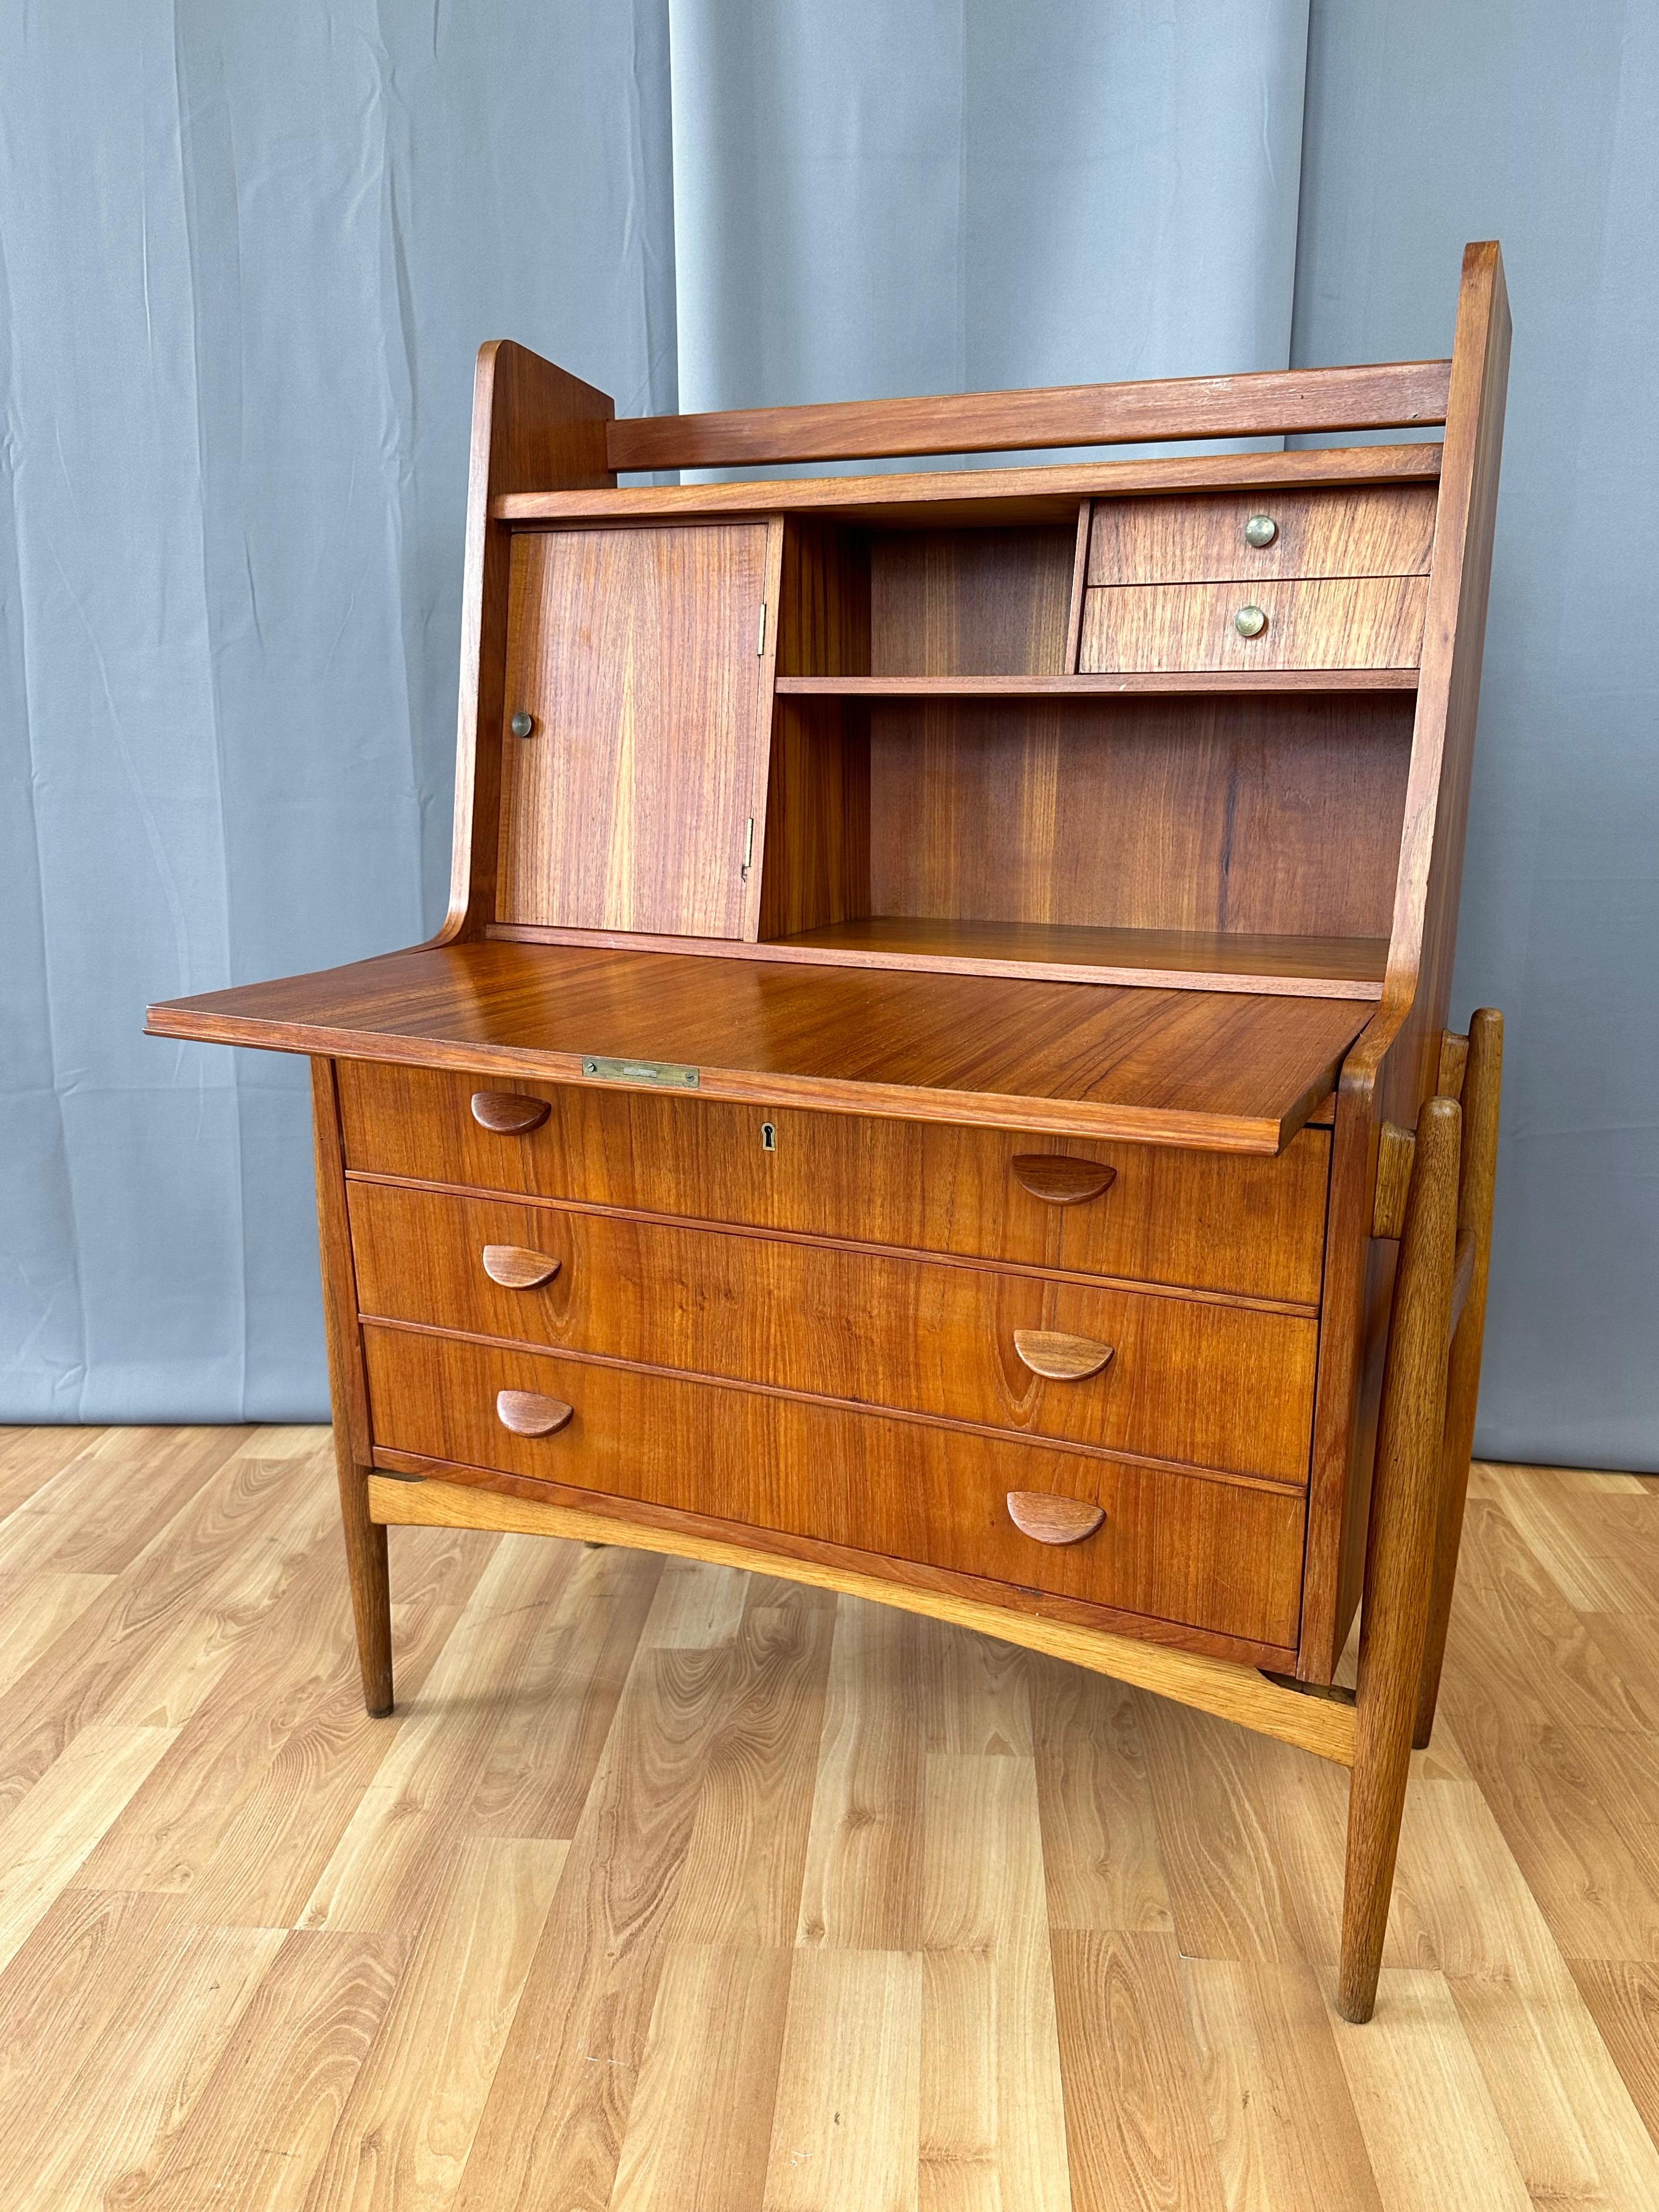 An utterly charming and quite uncommon 1951 Scandinavian modern teak and oak drop-front secretary desk or vanity from Denmark.

Front drops down to serve as a nicely-sized work surface. Upper section with a mirror-backed door with brass pull at left